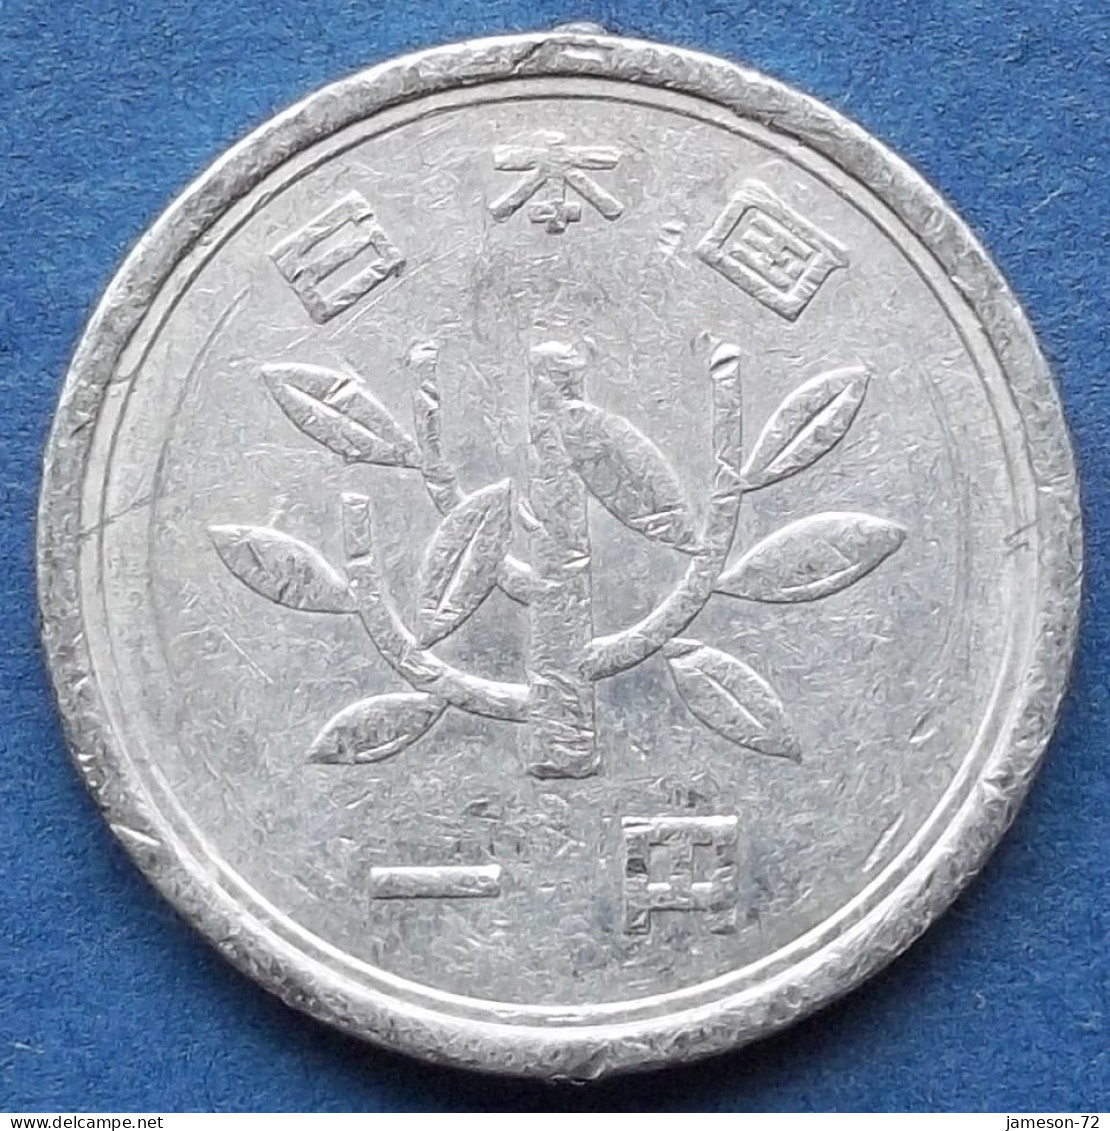 JAPAN - 1 Yen Year 10 (1998) "Sprouting Branch" Y# 95.2 Akihito (Heisei) (1989-2019) - Edelweiss Coins - Japan